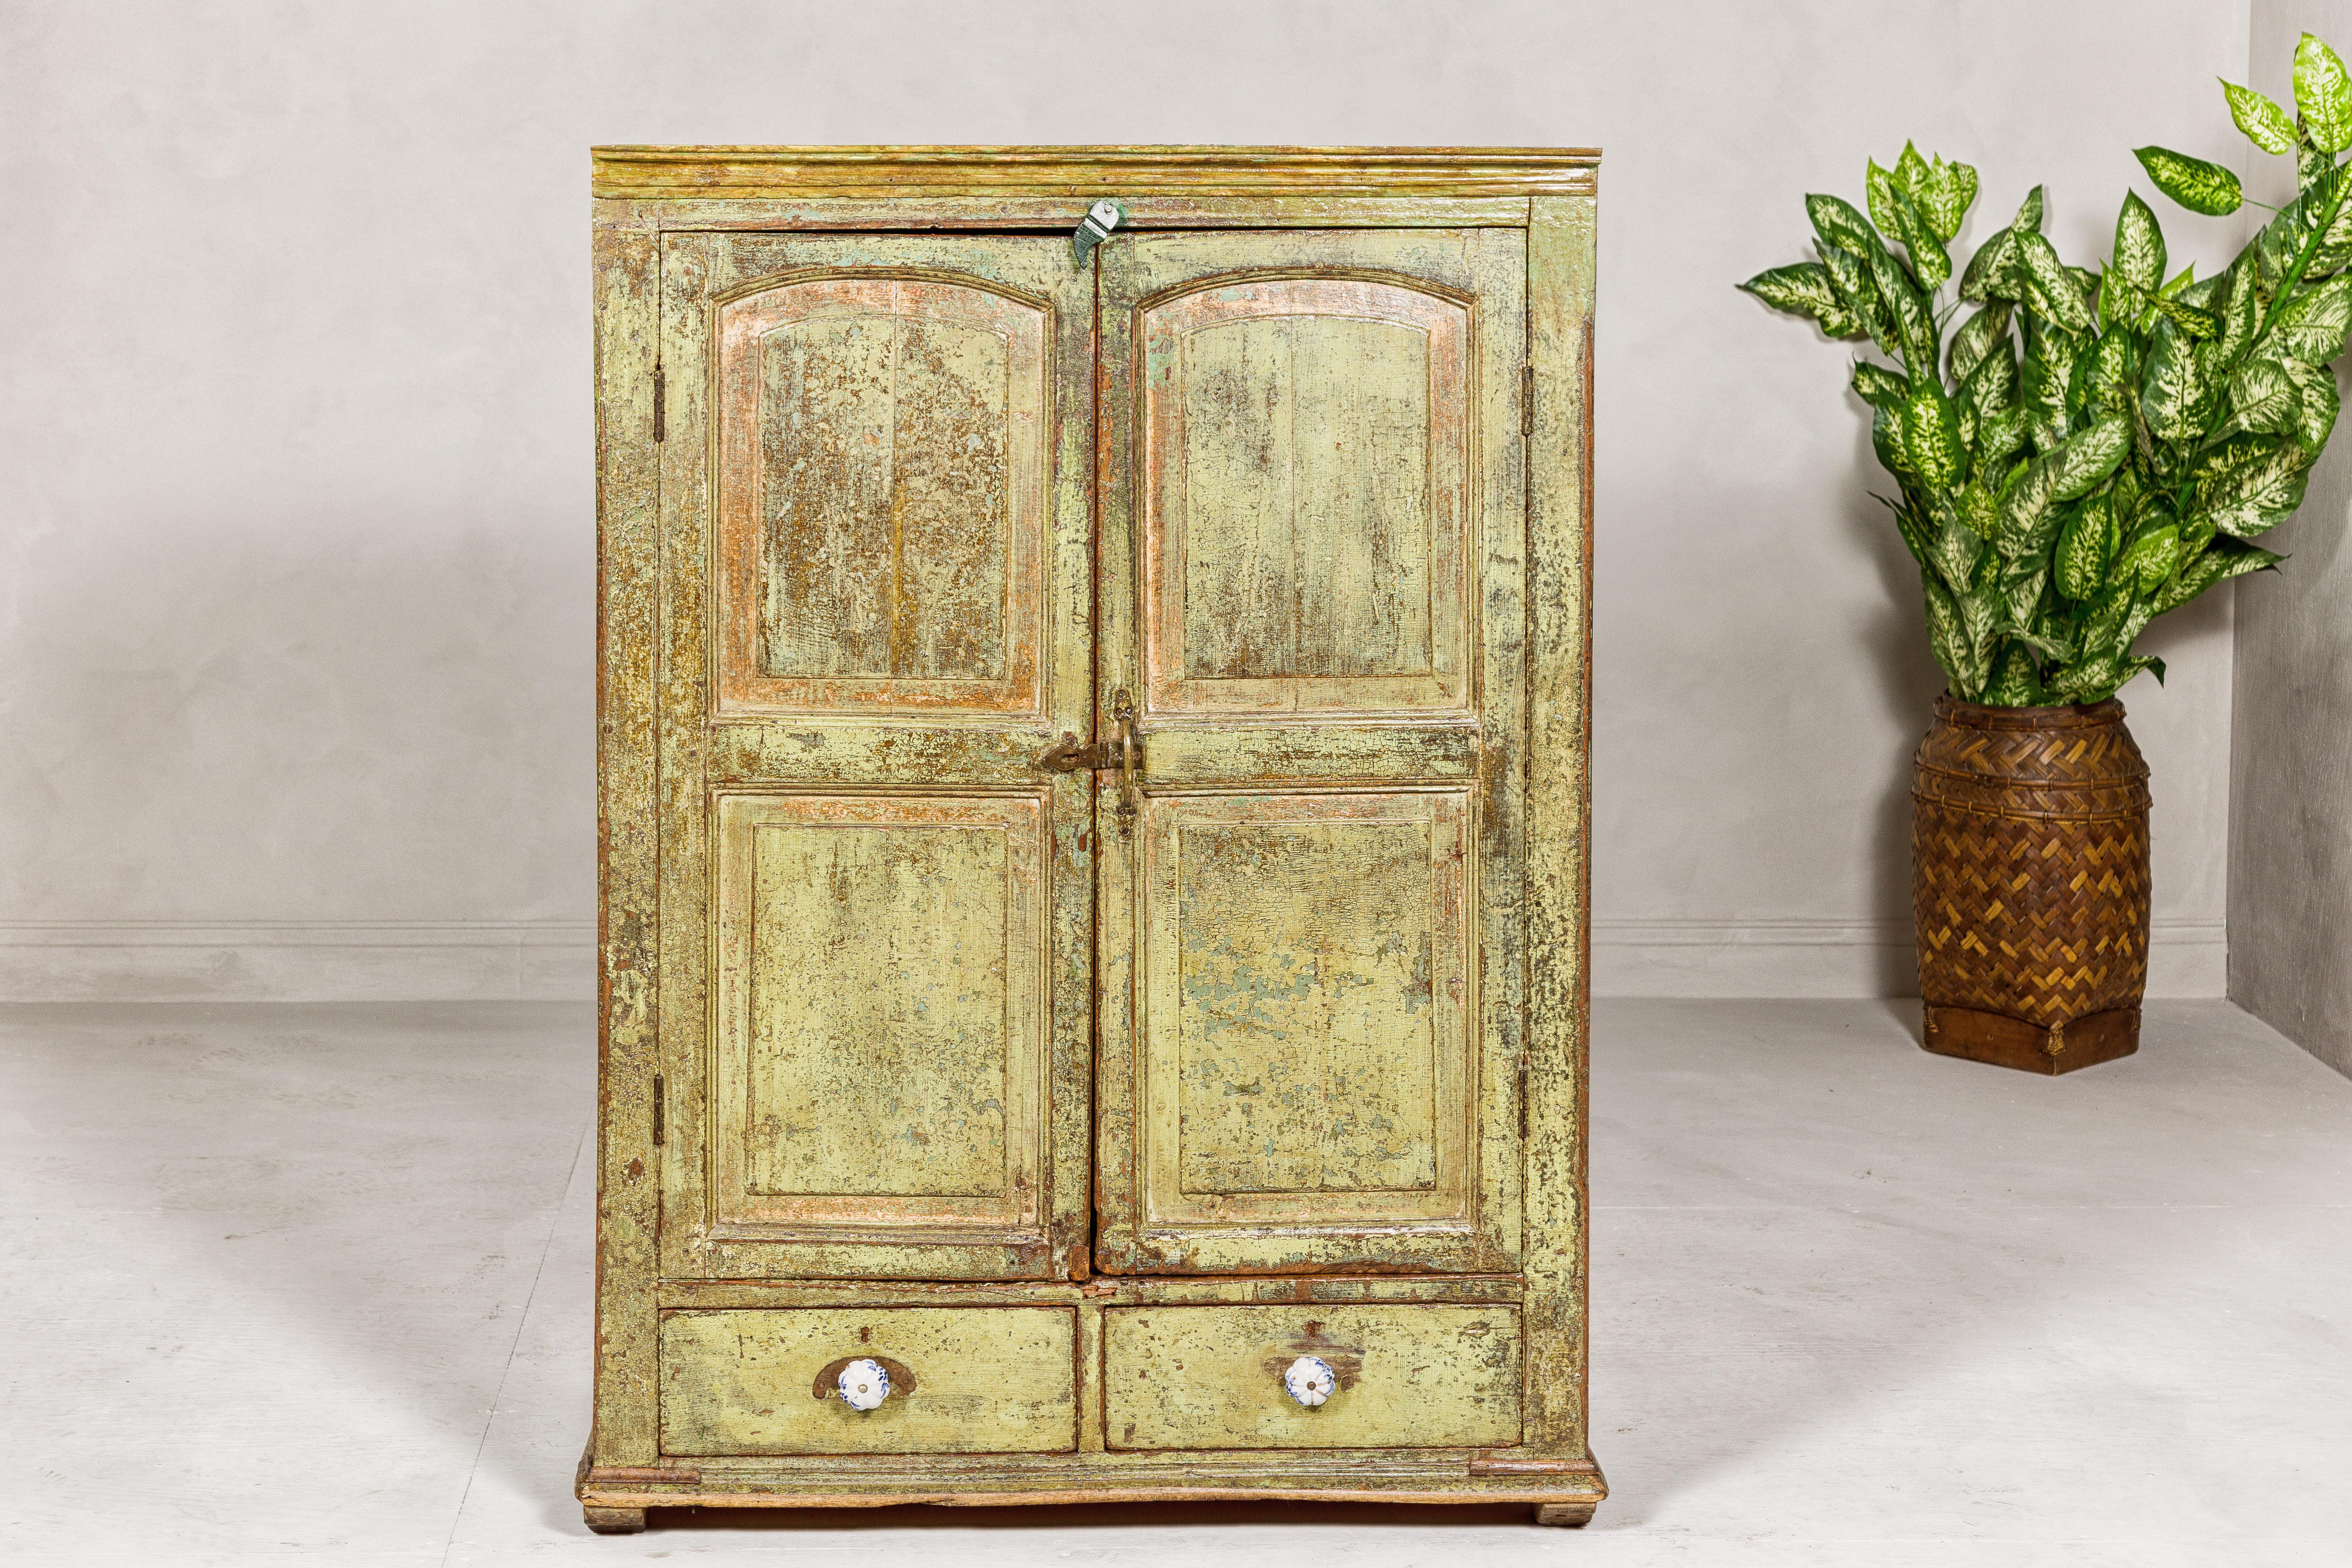 A small distressed green painted Indian cabinet from the 19th century with paneled doors and two lower drawers. This 19th-century Indian cabinet exudes rustic elegance with its distressed green paint finish, lending an air of historic charm to any